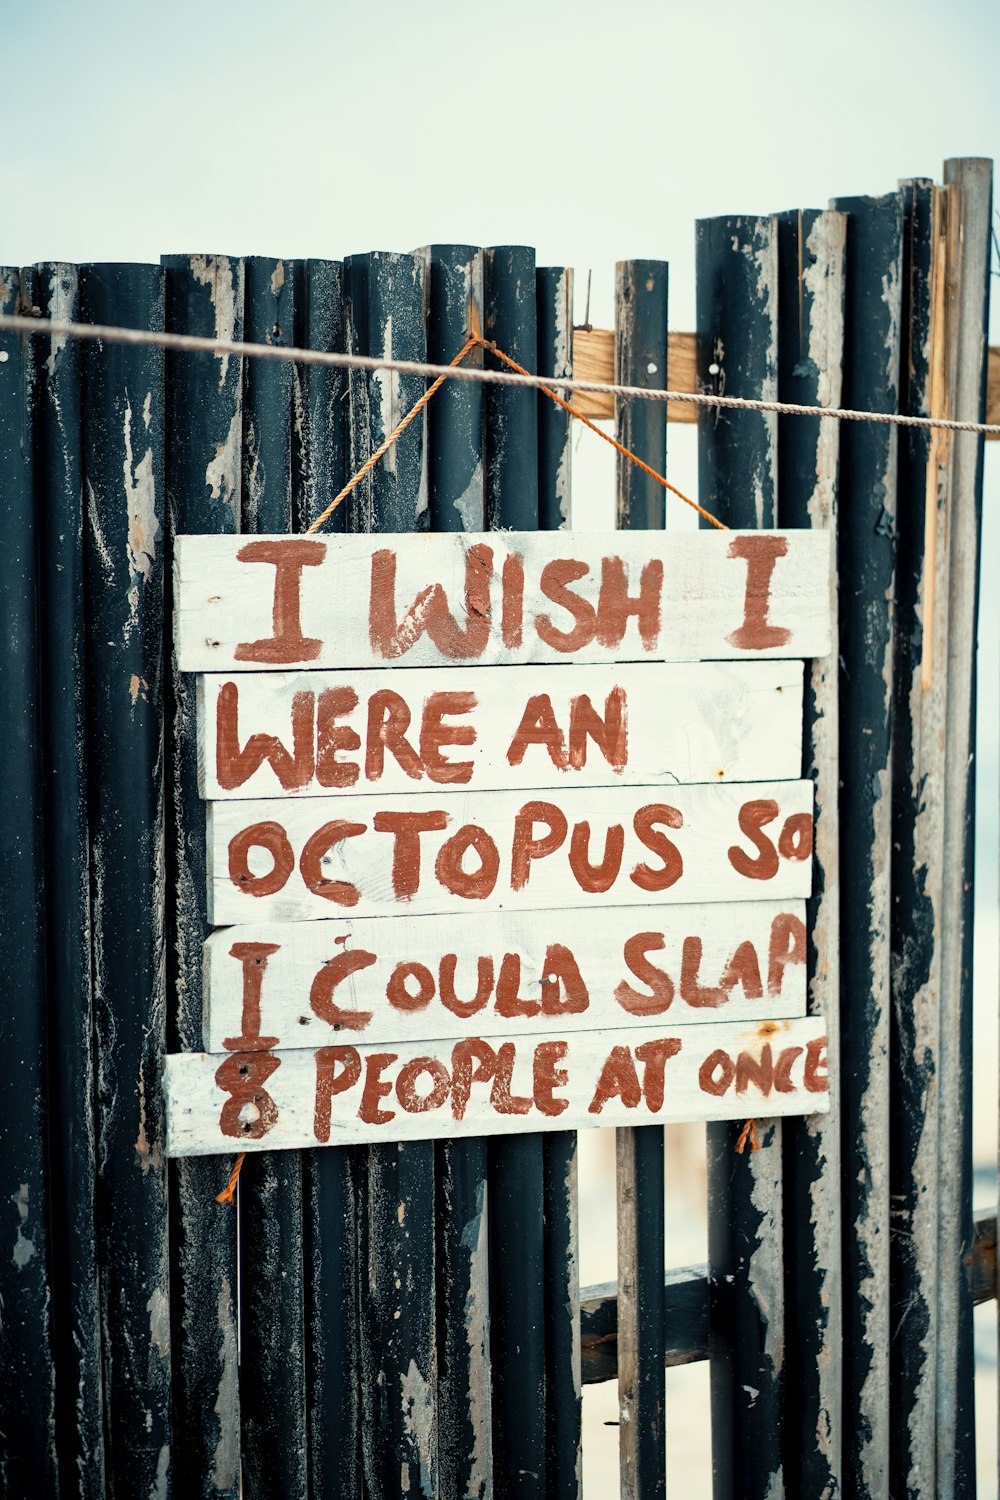 a sign on a fence that says i wish i were an octopus so i could